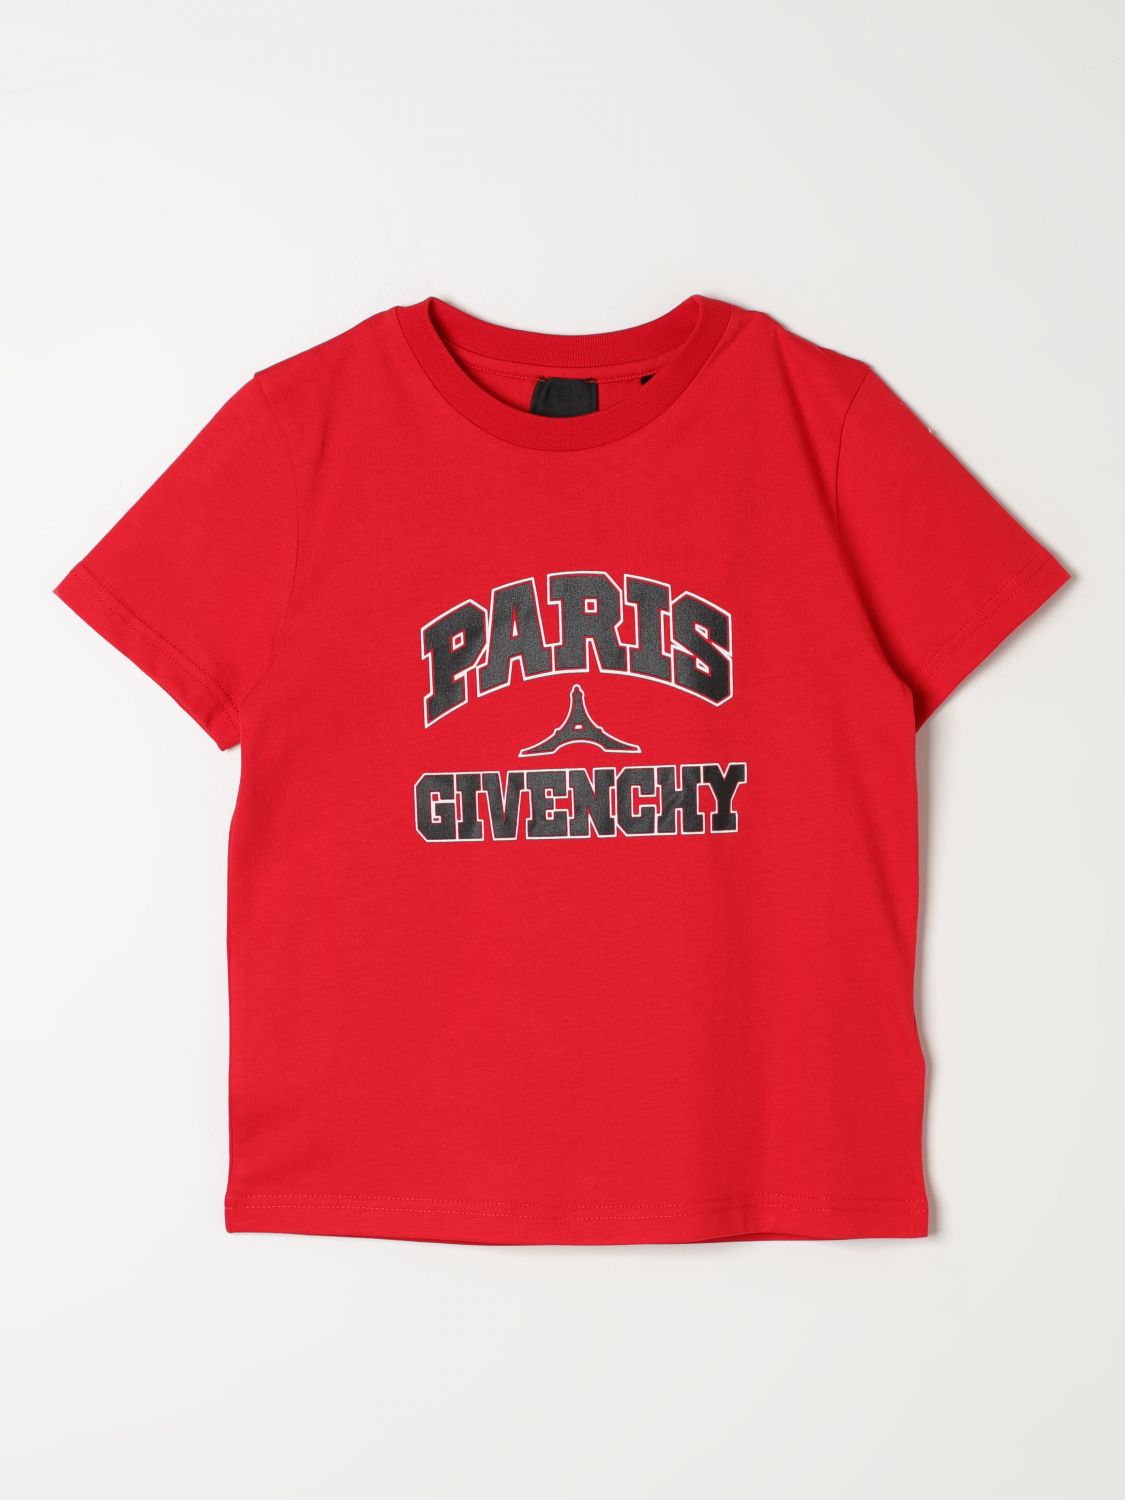 Givenchy T-shirt  Kids Colour Red